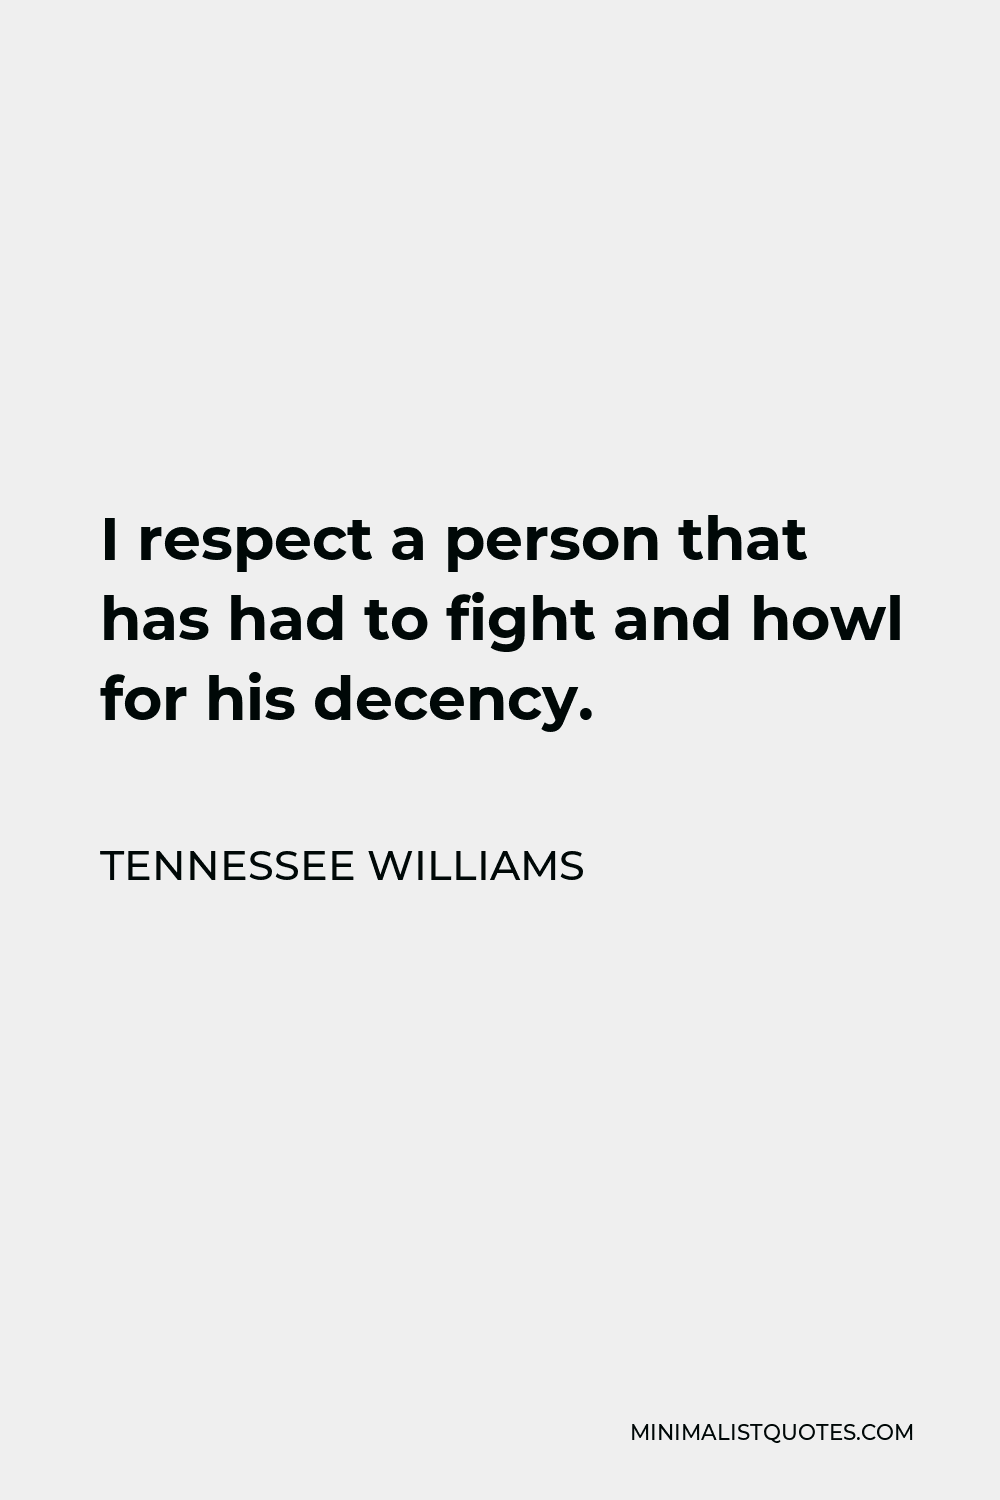 Tennessee Williams Quote - I respect a person that has had to fight and howl for his decency.